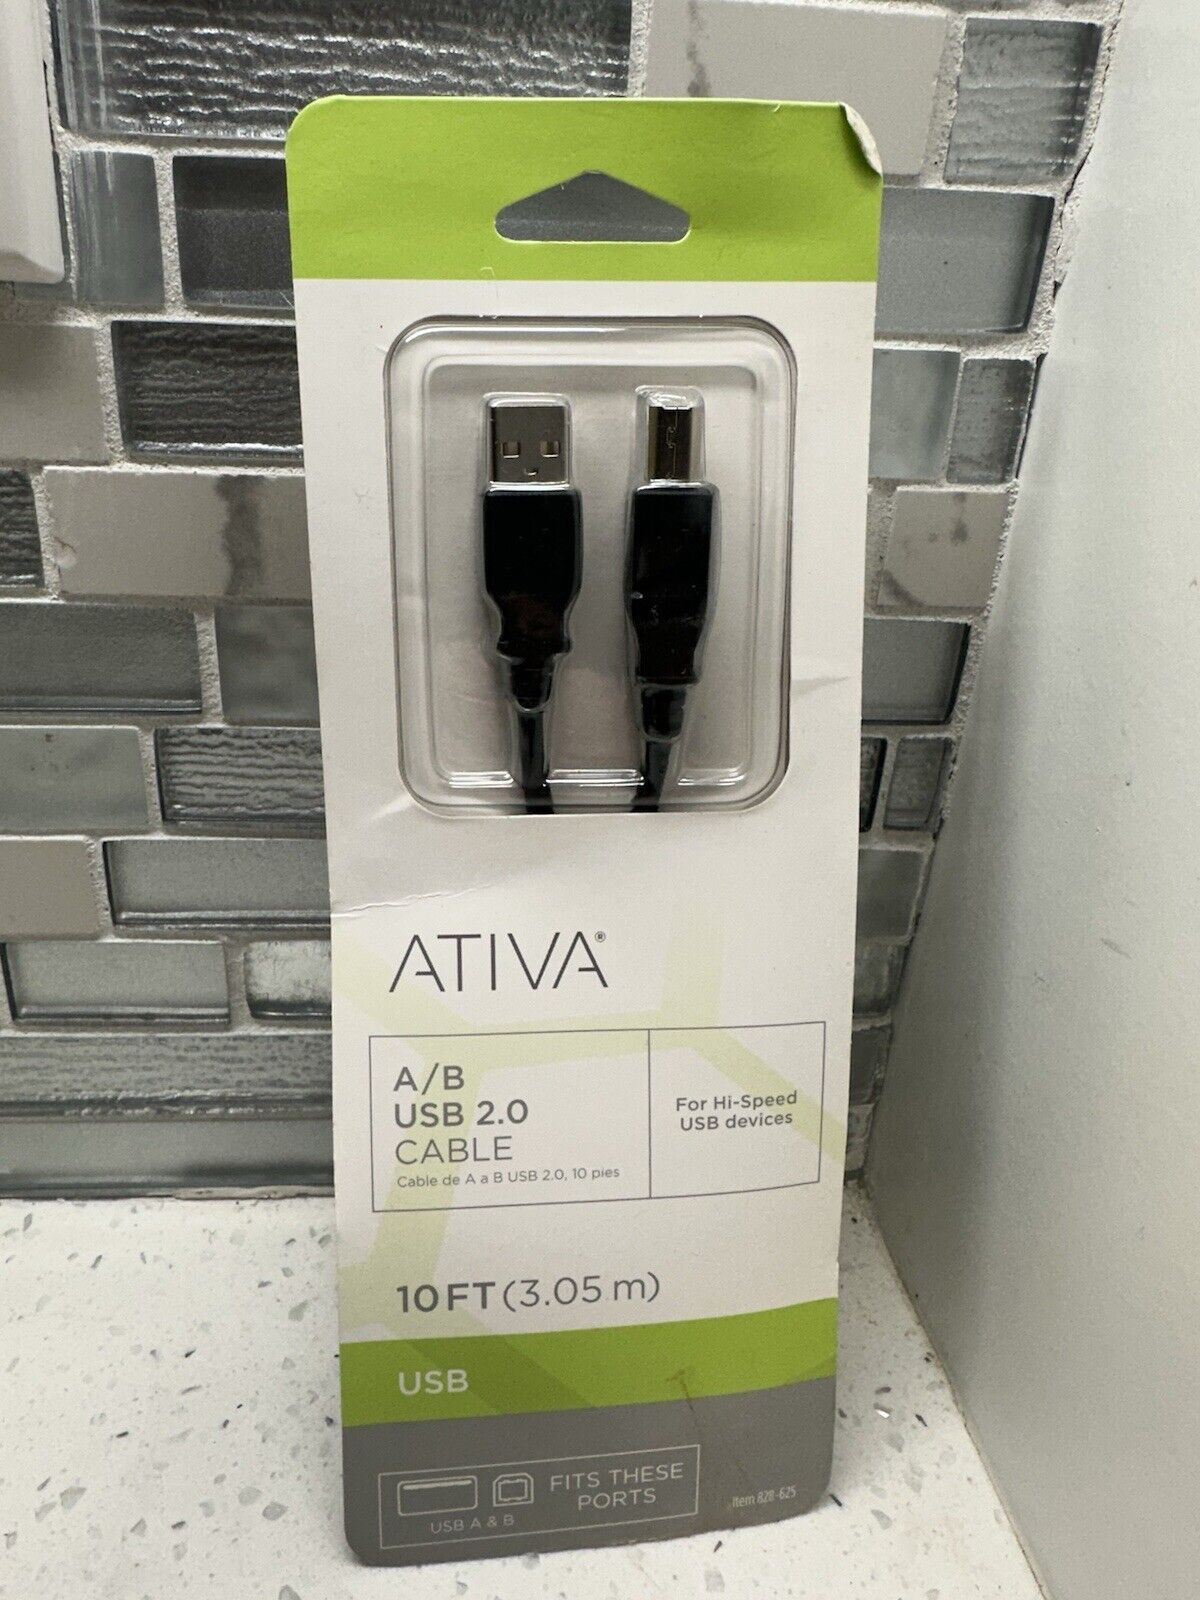 Ativa USB 2.0 Cable 10 Ft (3.05m) New Sealed B100